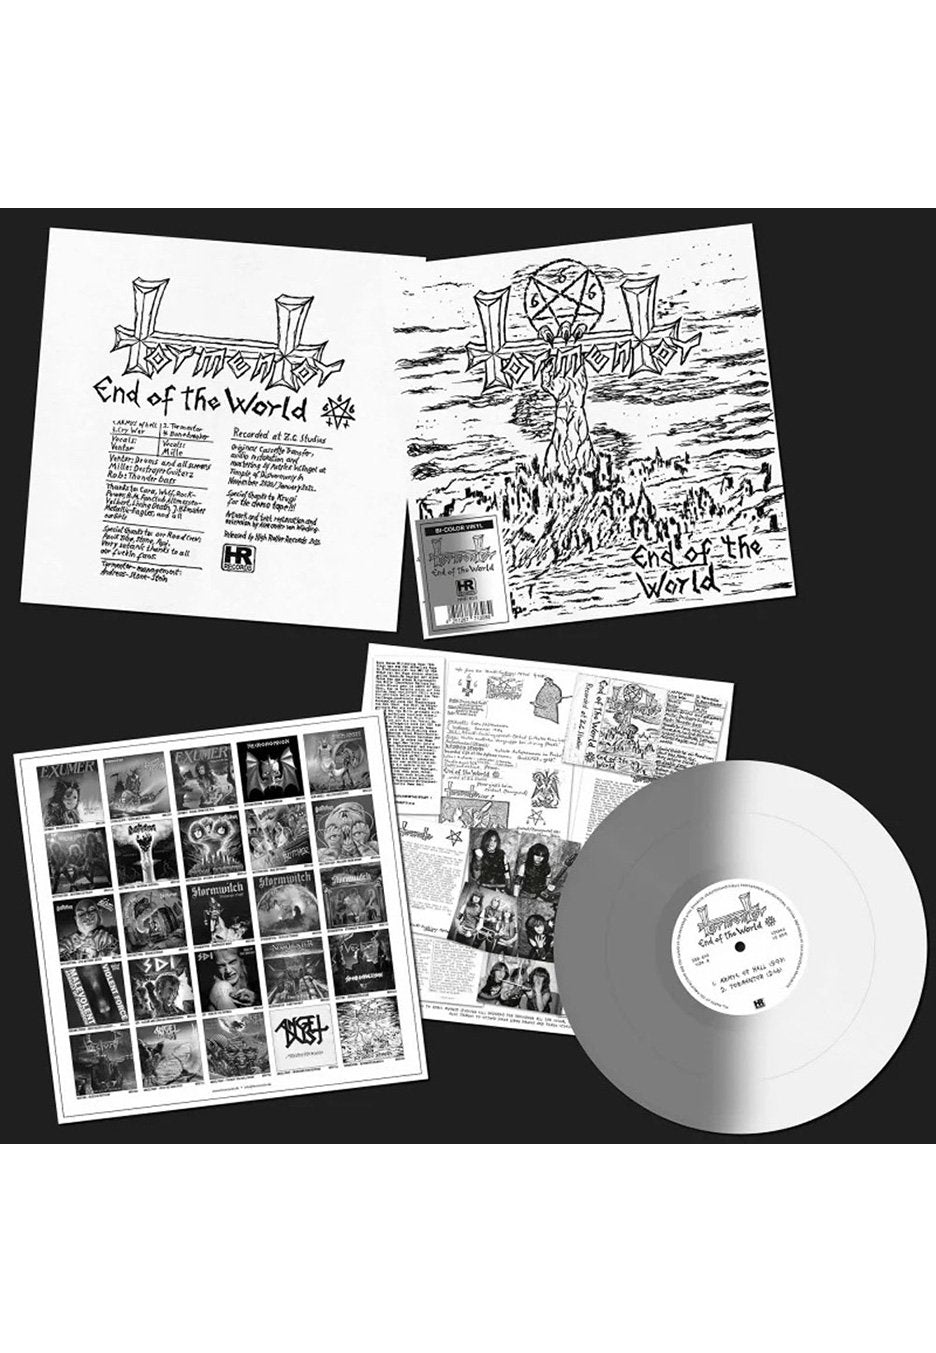 Tormentor - End Of The World Demo '84 White/Grey - Colored Mini Vinyl